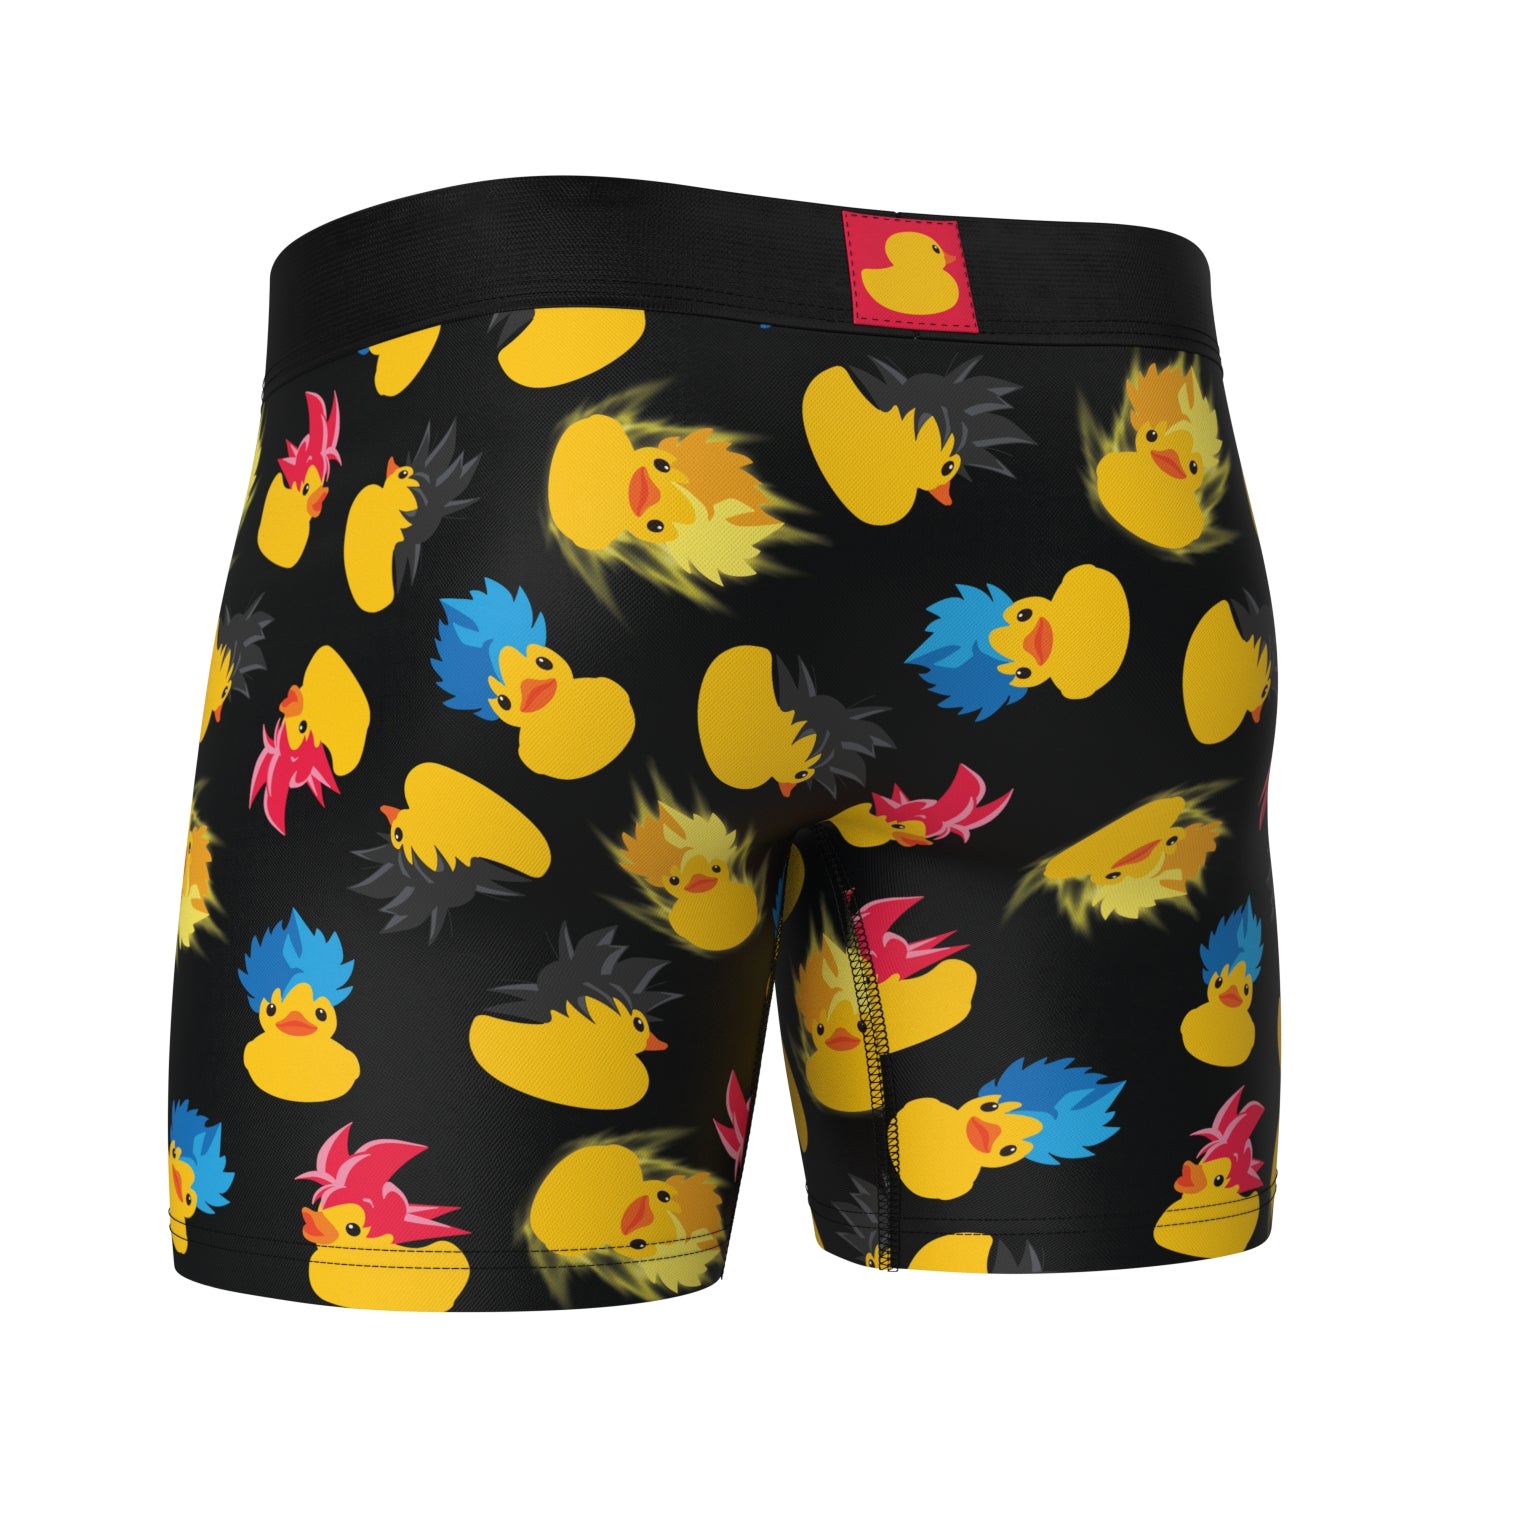 SWAG DUCKYBALL Z BOXERS